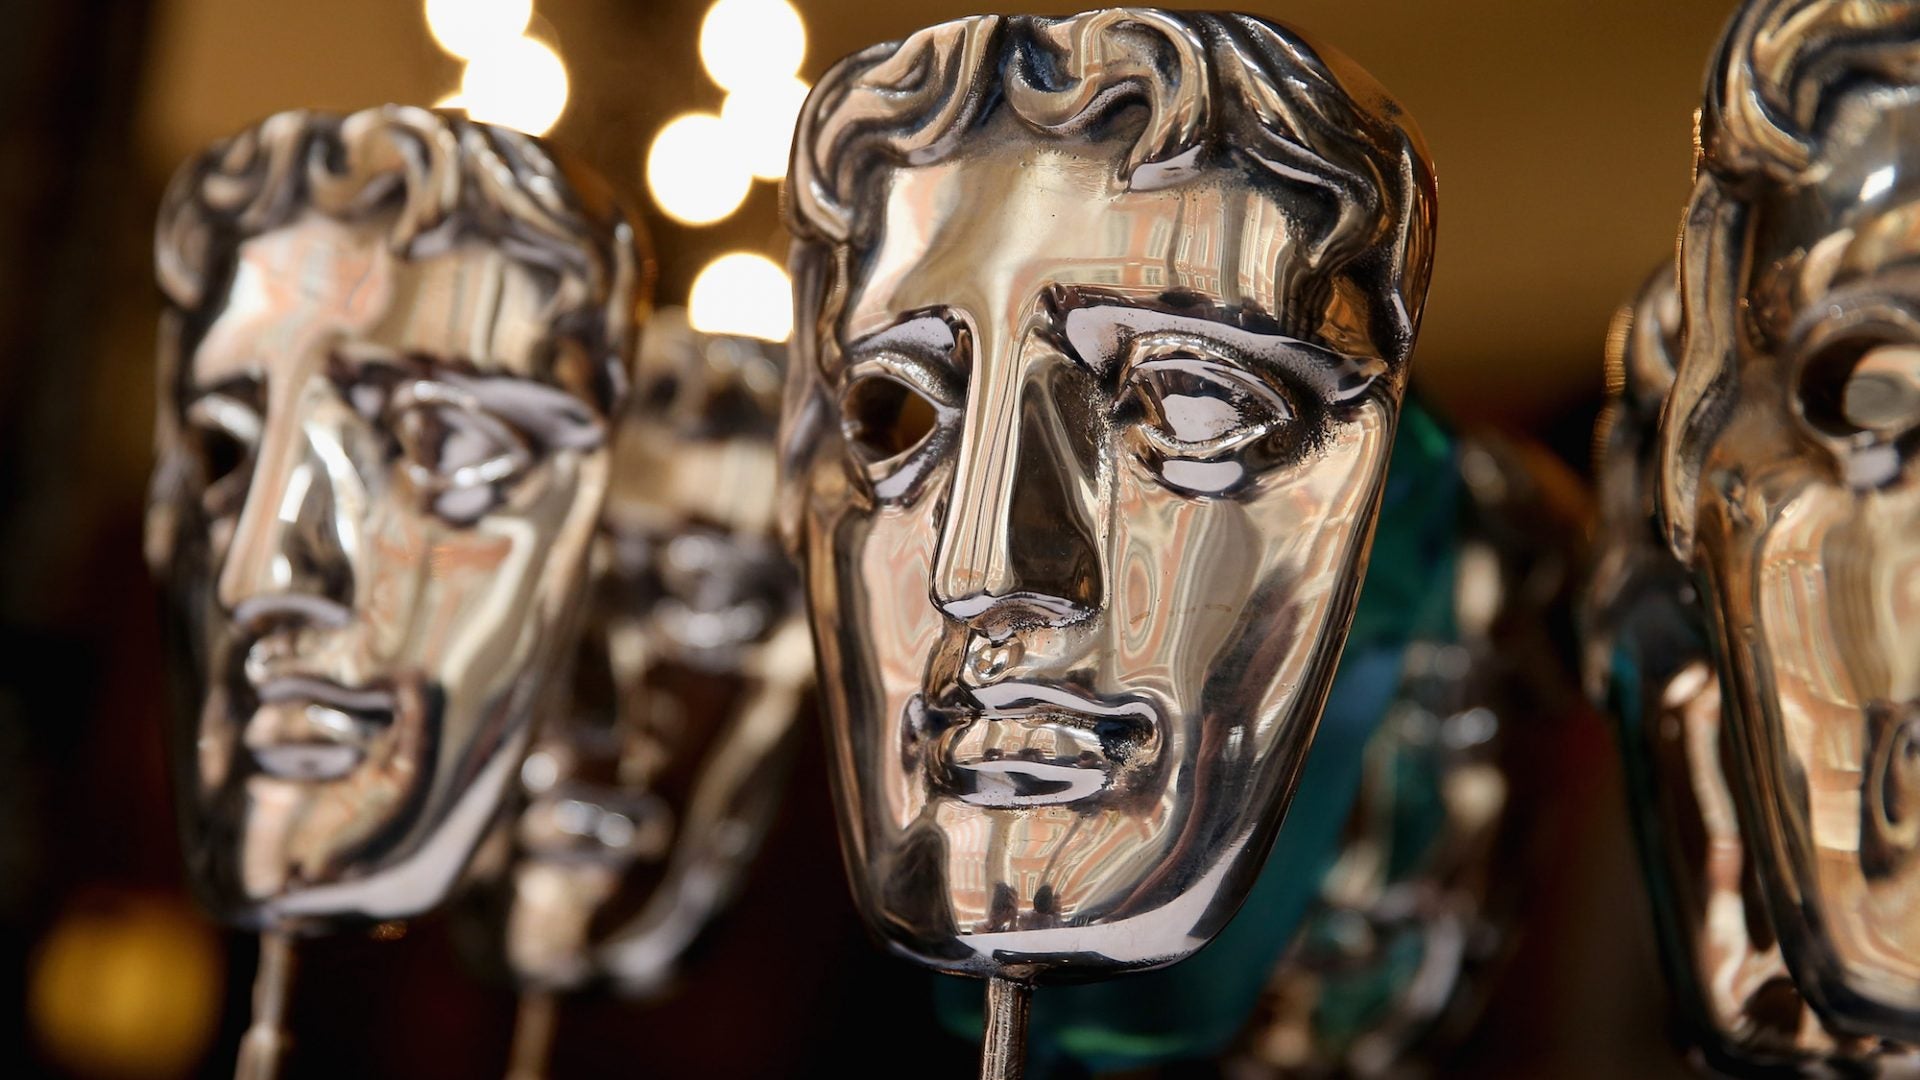 Only White Actors Received Nominations For The 2020 BAFTAs